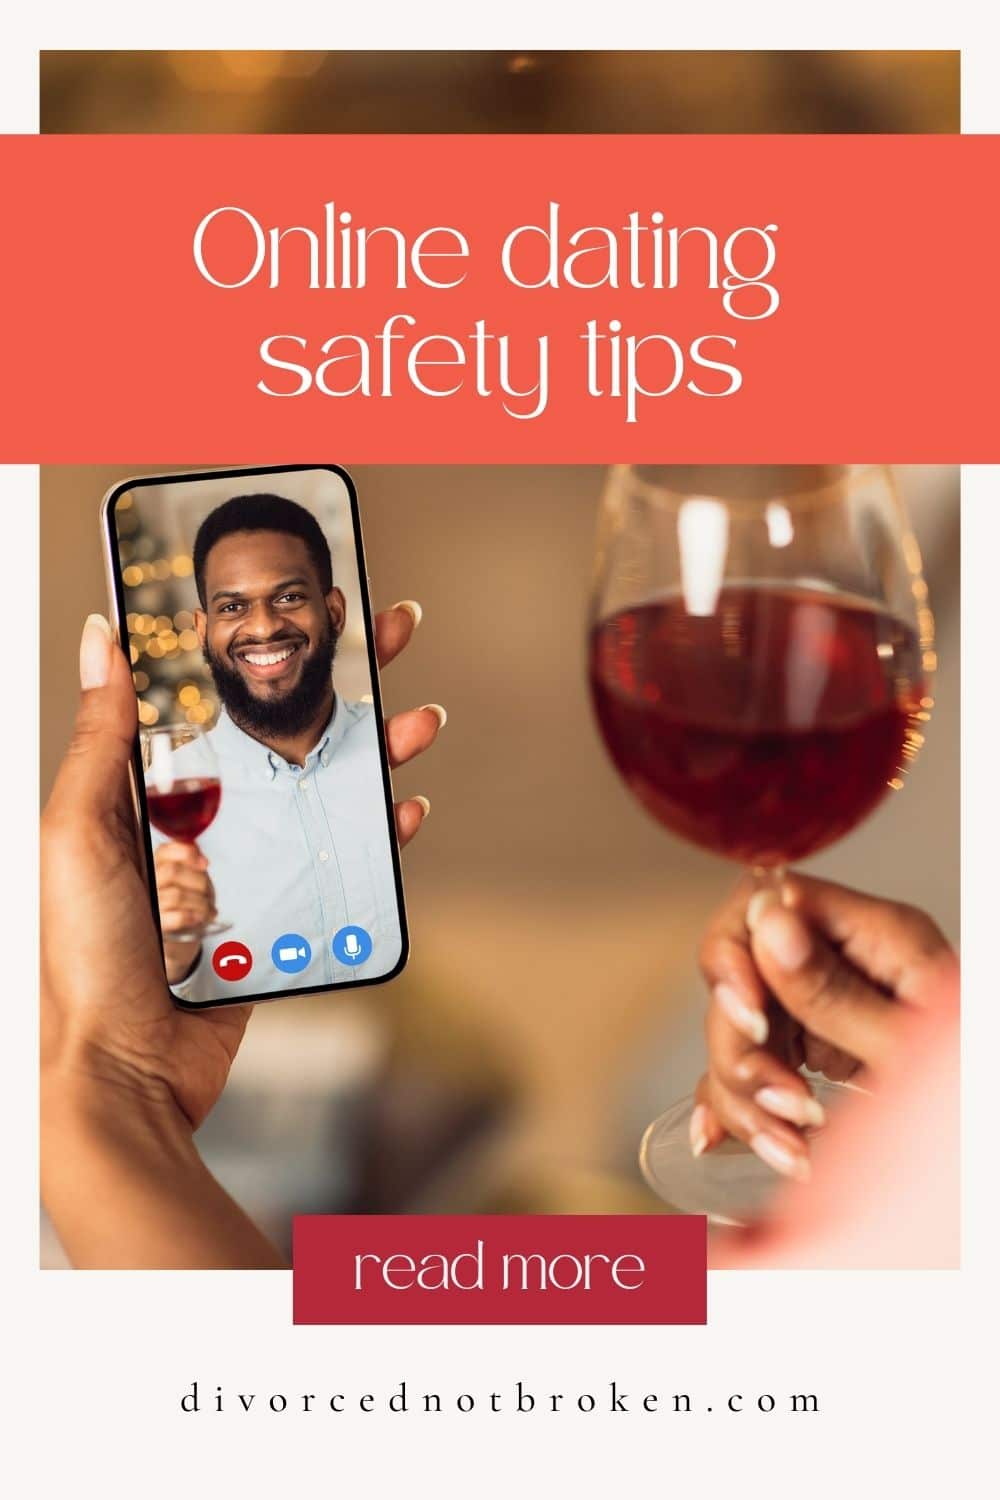 A woman holding a wine glass with red wine in one hand and her cell phone with the image of her date holding a glass of red wine in the other.